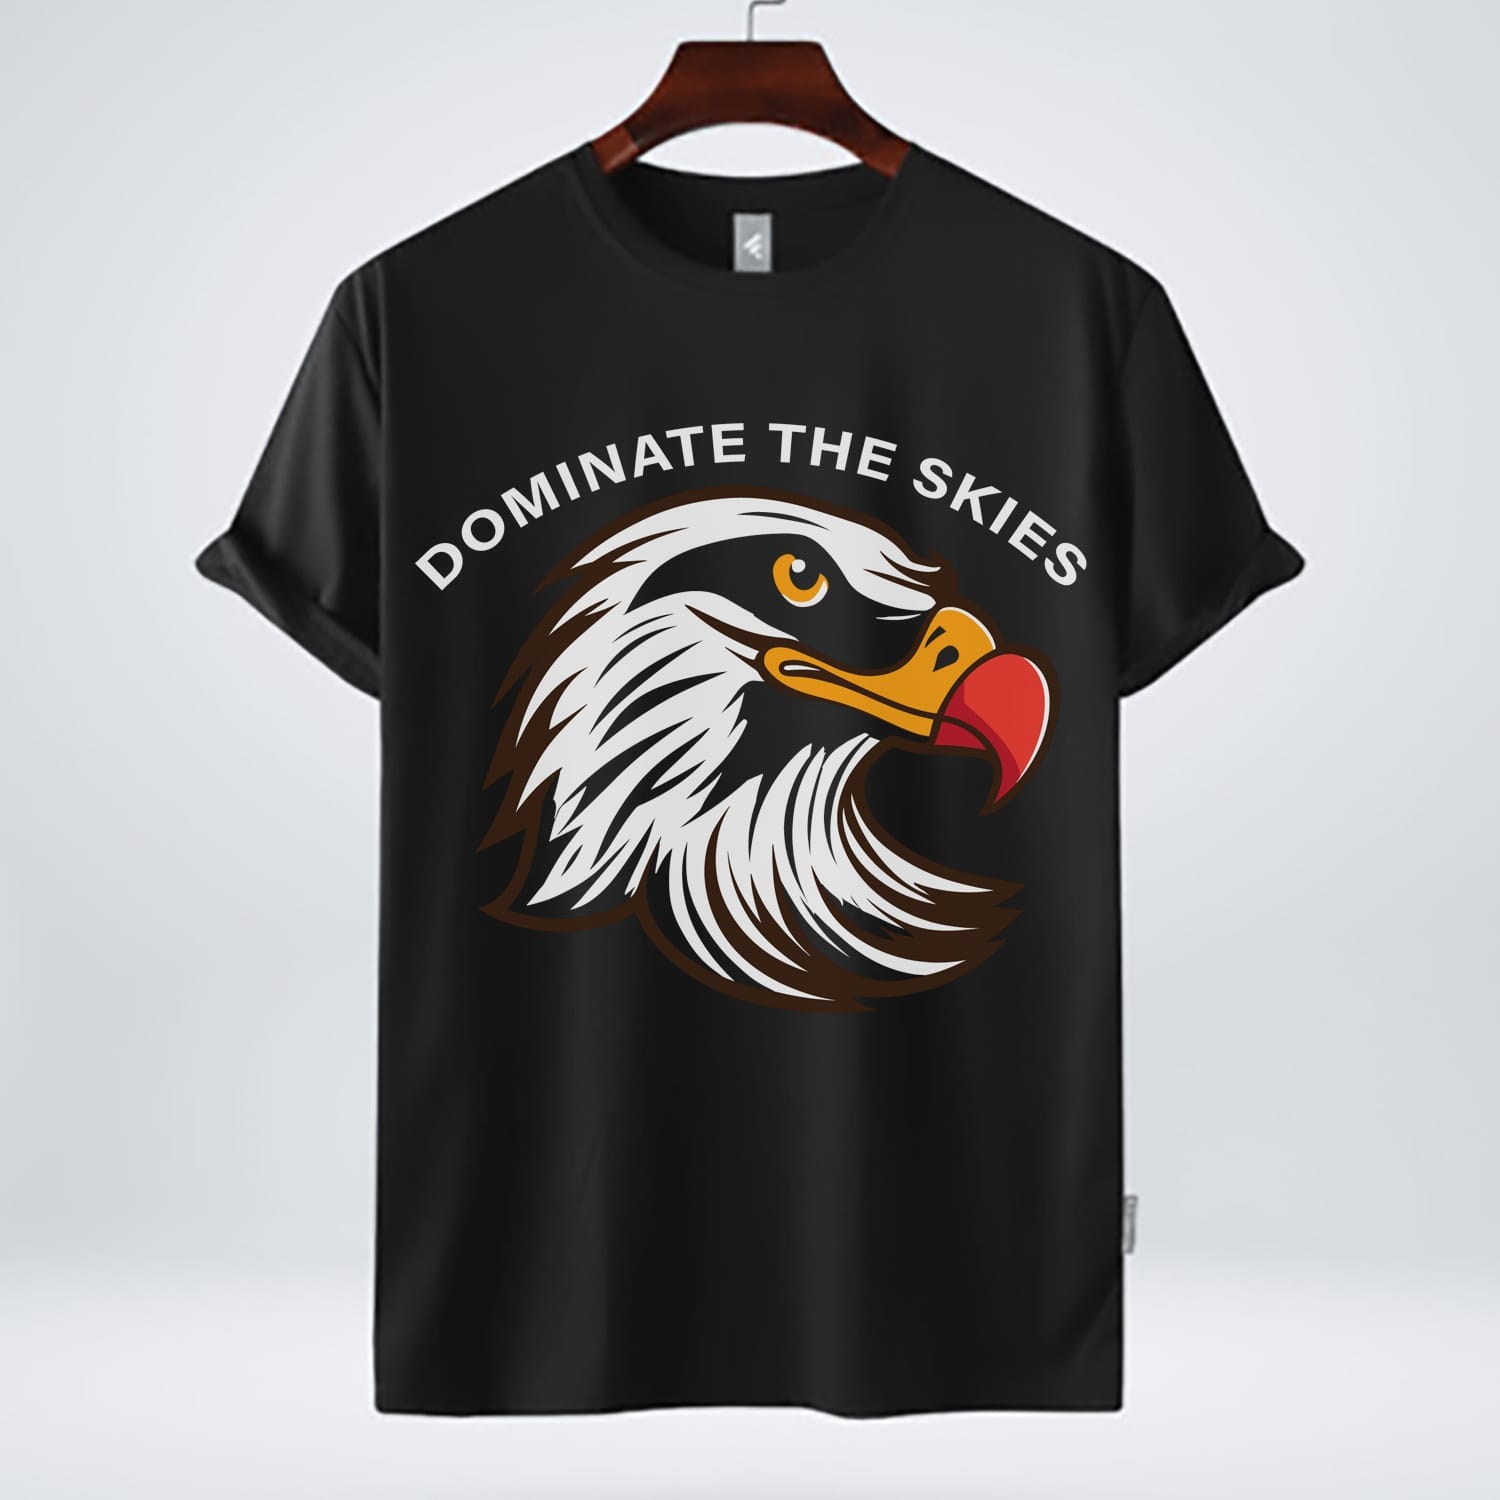 "Dominate the skies with our striking 'Dominate The Skies' Eagle T-shirt design